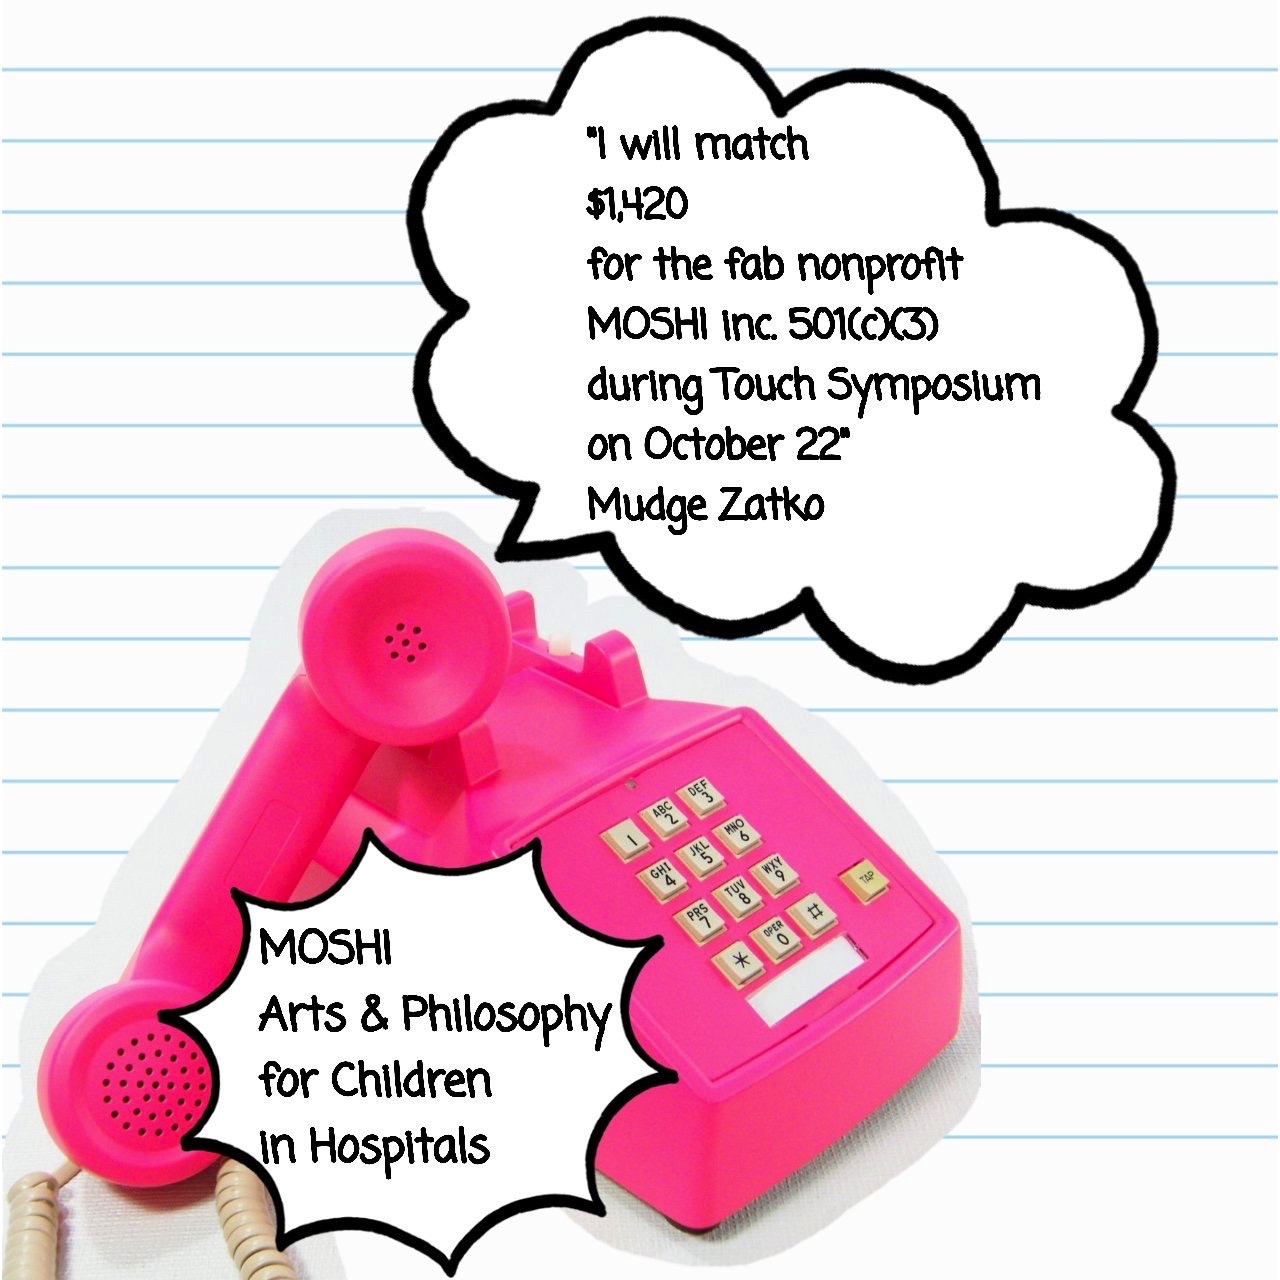 A pink, 1980s-era touchtone telephone with the receiver off the hook. The text reads: 'I will match $1,420 for the fab nonprofit MOSHI inc. 501(c)(3) during Touch Symposium on October 22 --Mudge Zatko'